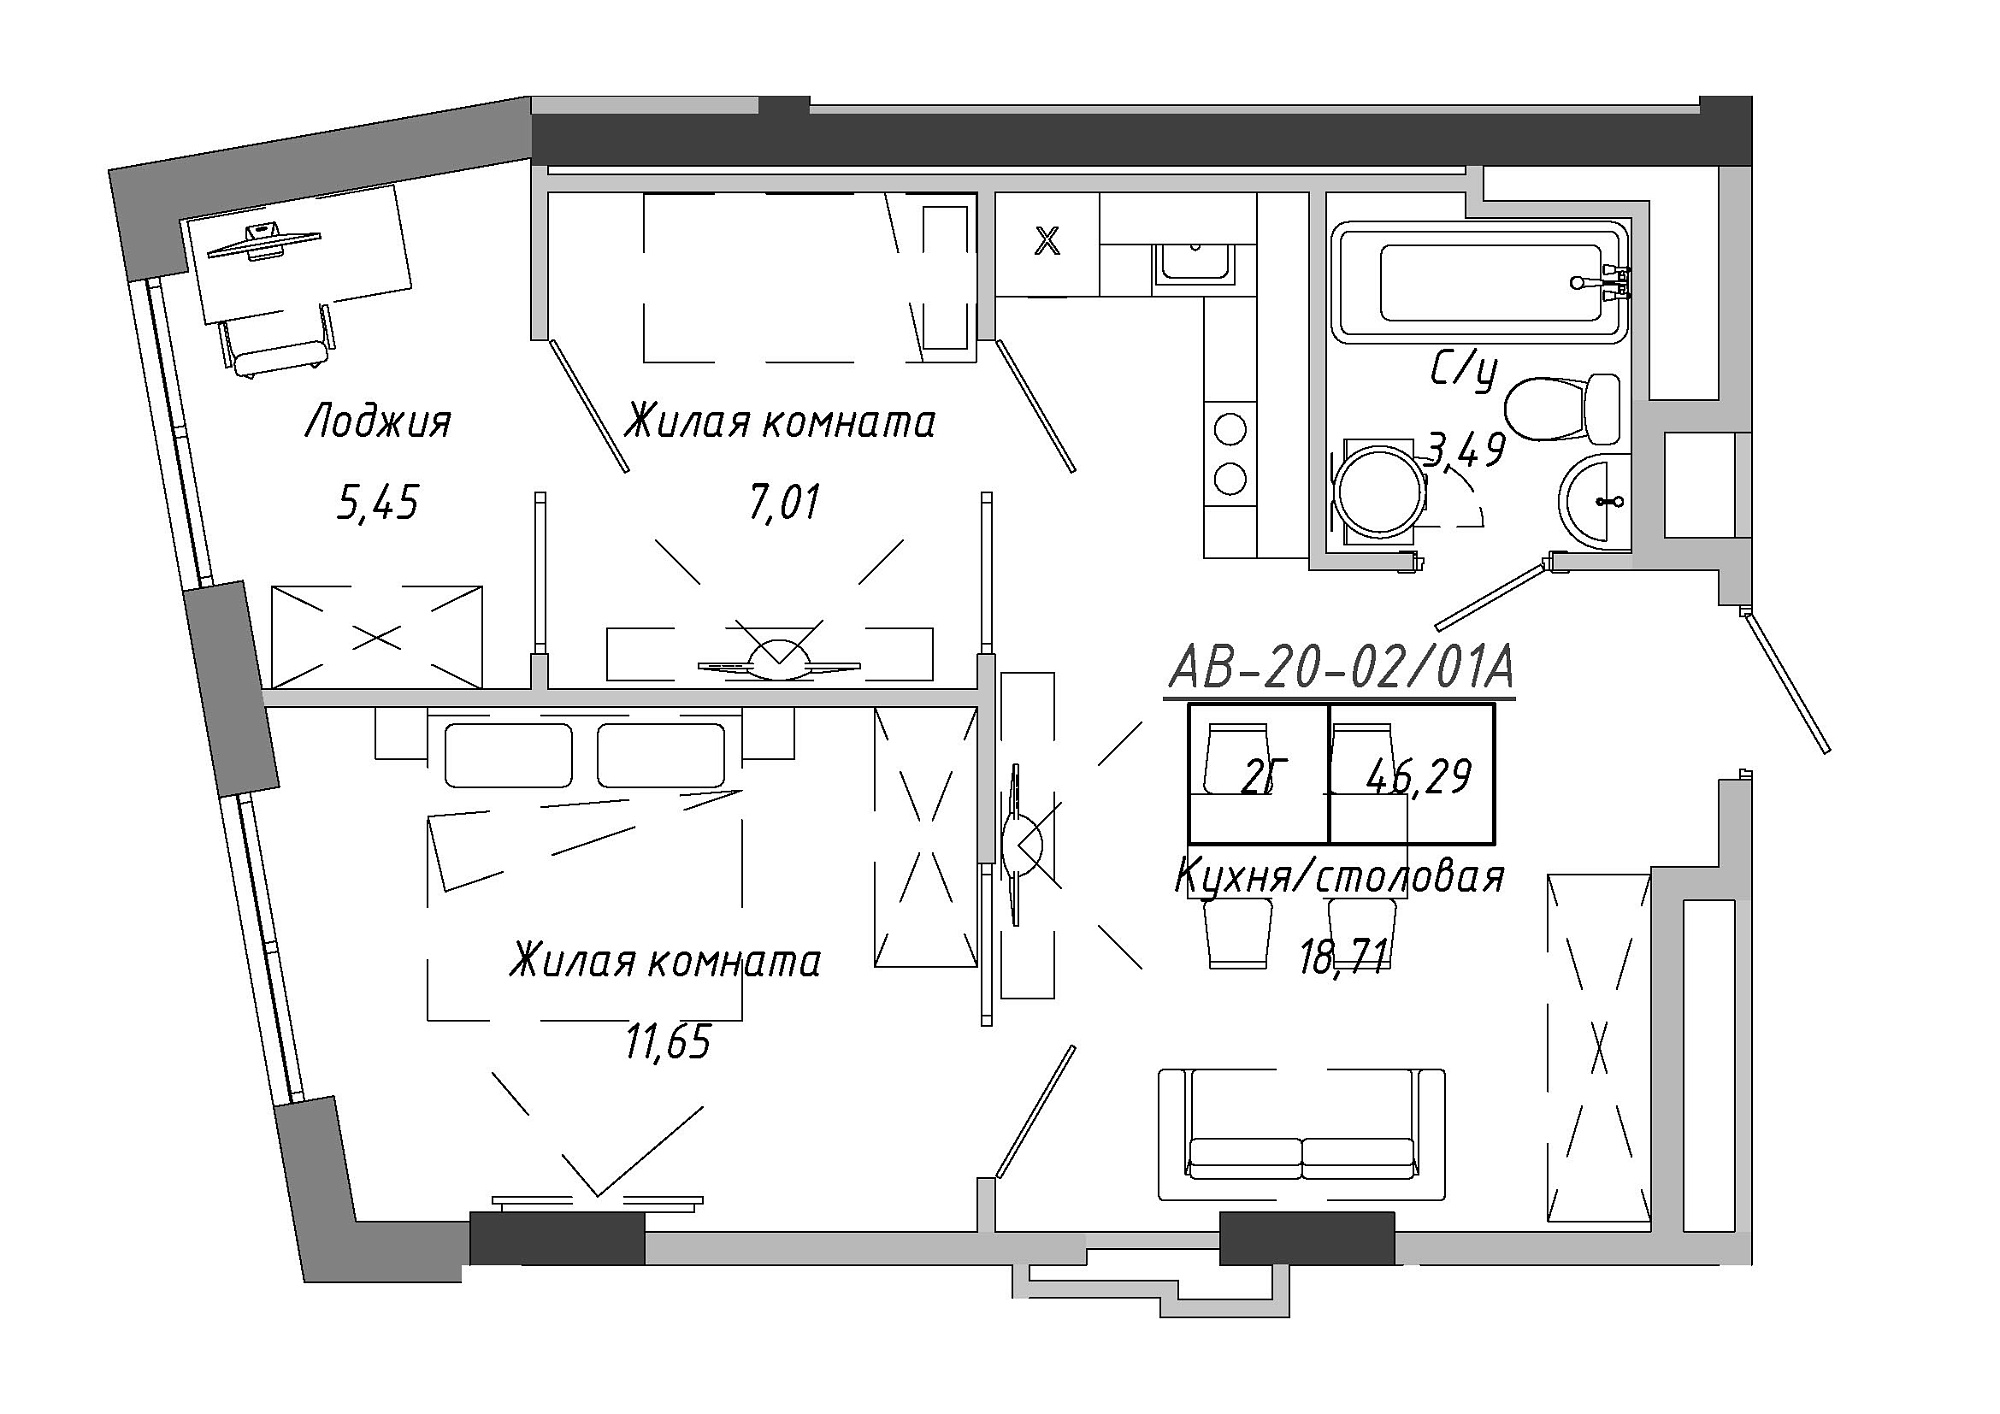 Planning 2-rm flats area 46.29m2, AB-20-02/0001а.